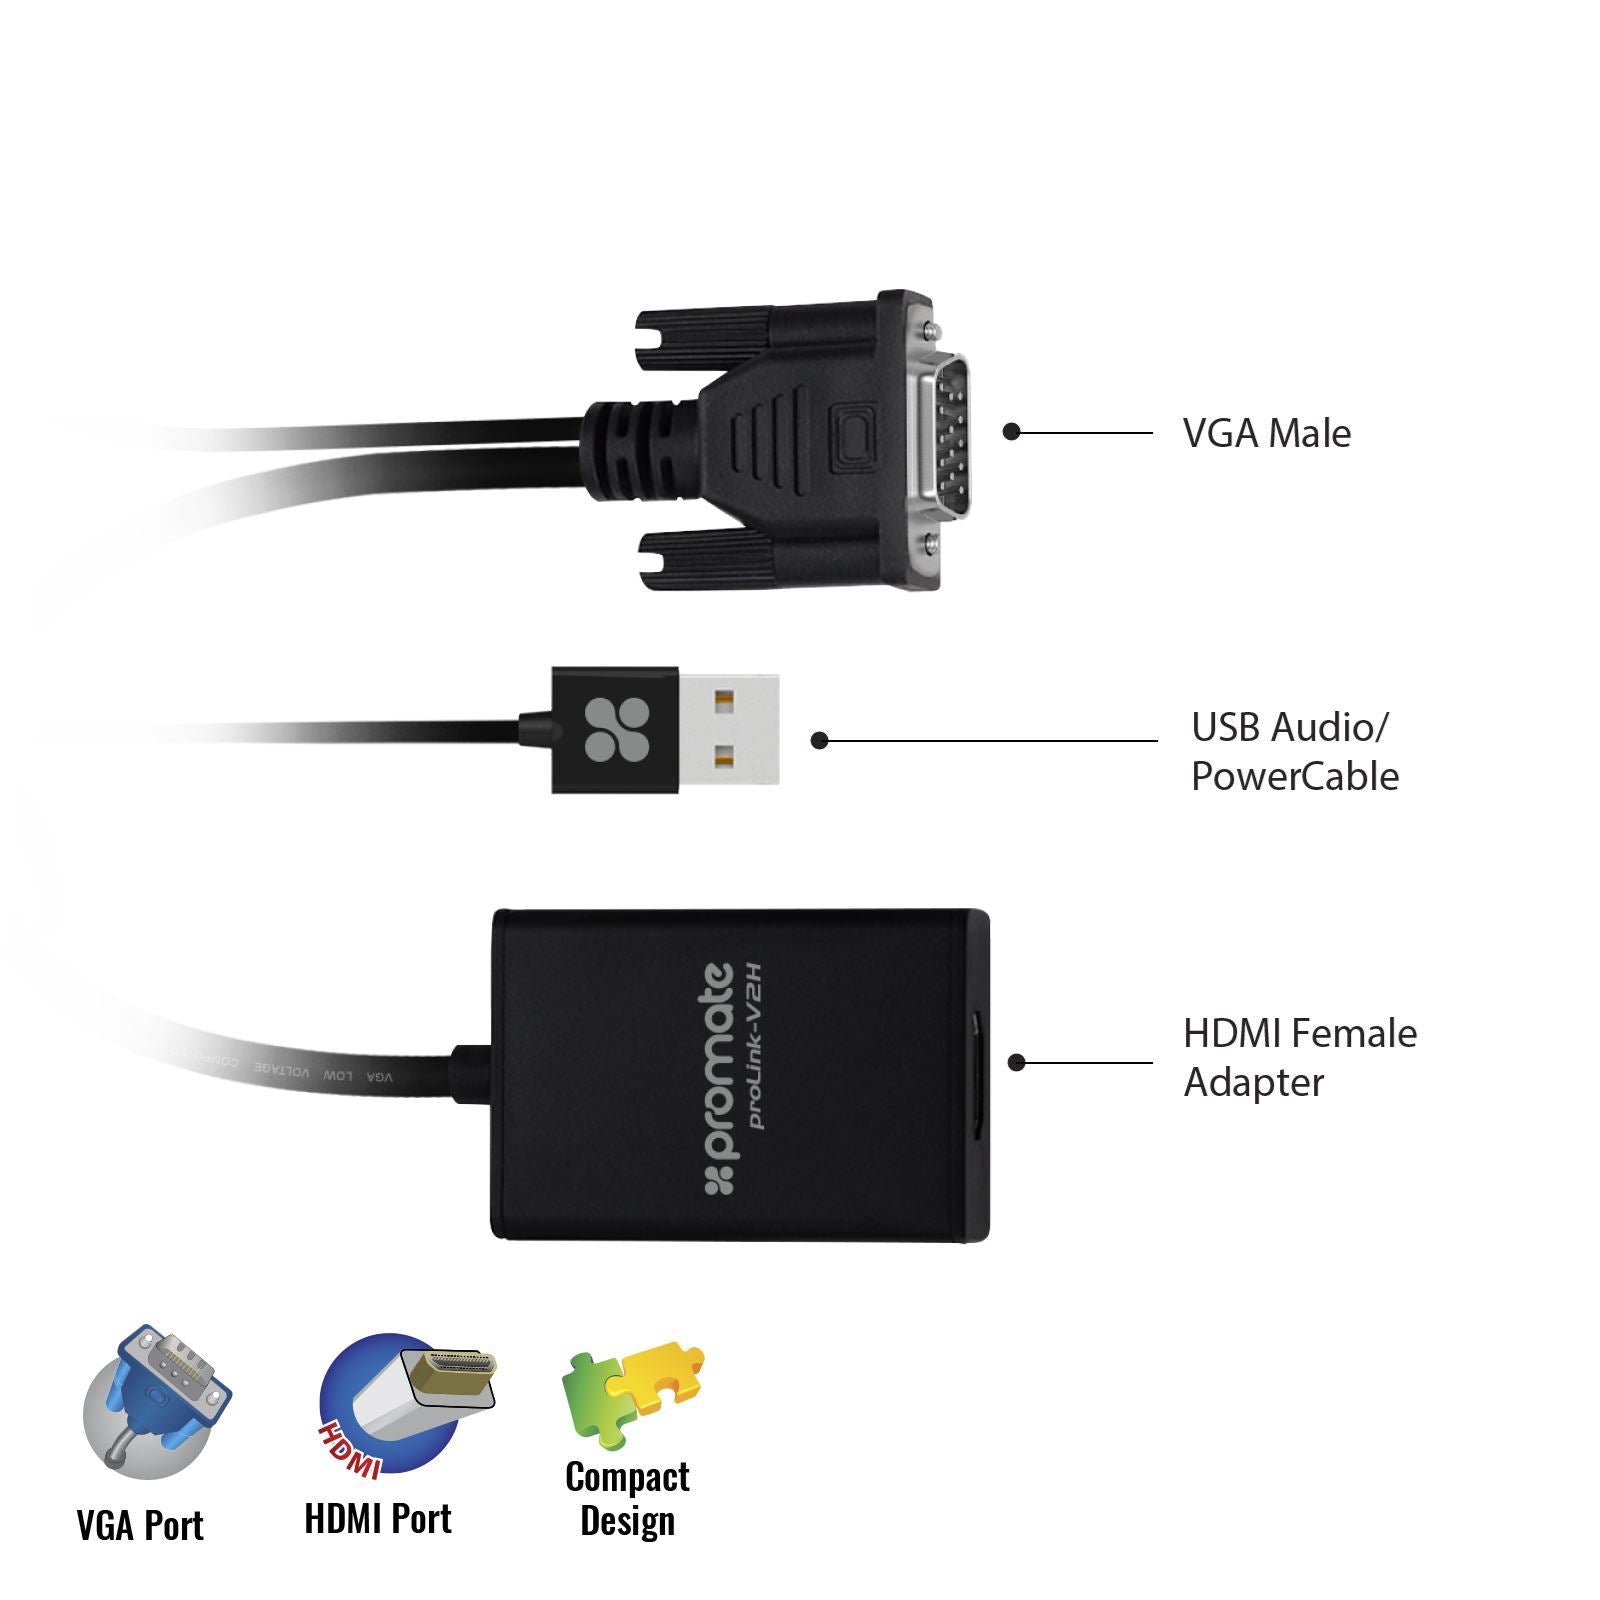 PROMATE_VGA_(Male)_to_HDMI_(Female)_Display_Adaptor_Kit_with_Audio._Supports_up_to_1920x1080@60Hz._Hassle-free_Setup_Plug-and-play._Supports_both_Windows_&_Mac._Black_Colour. 1725